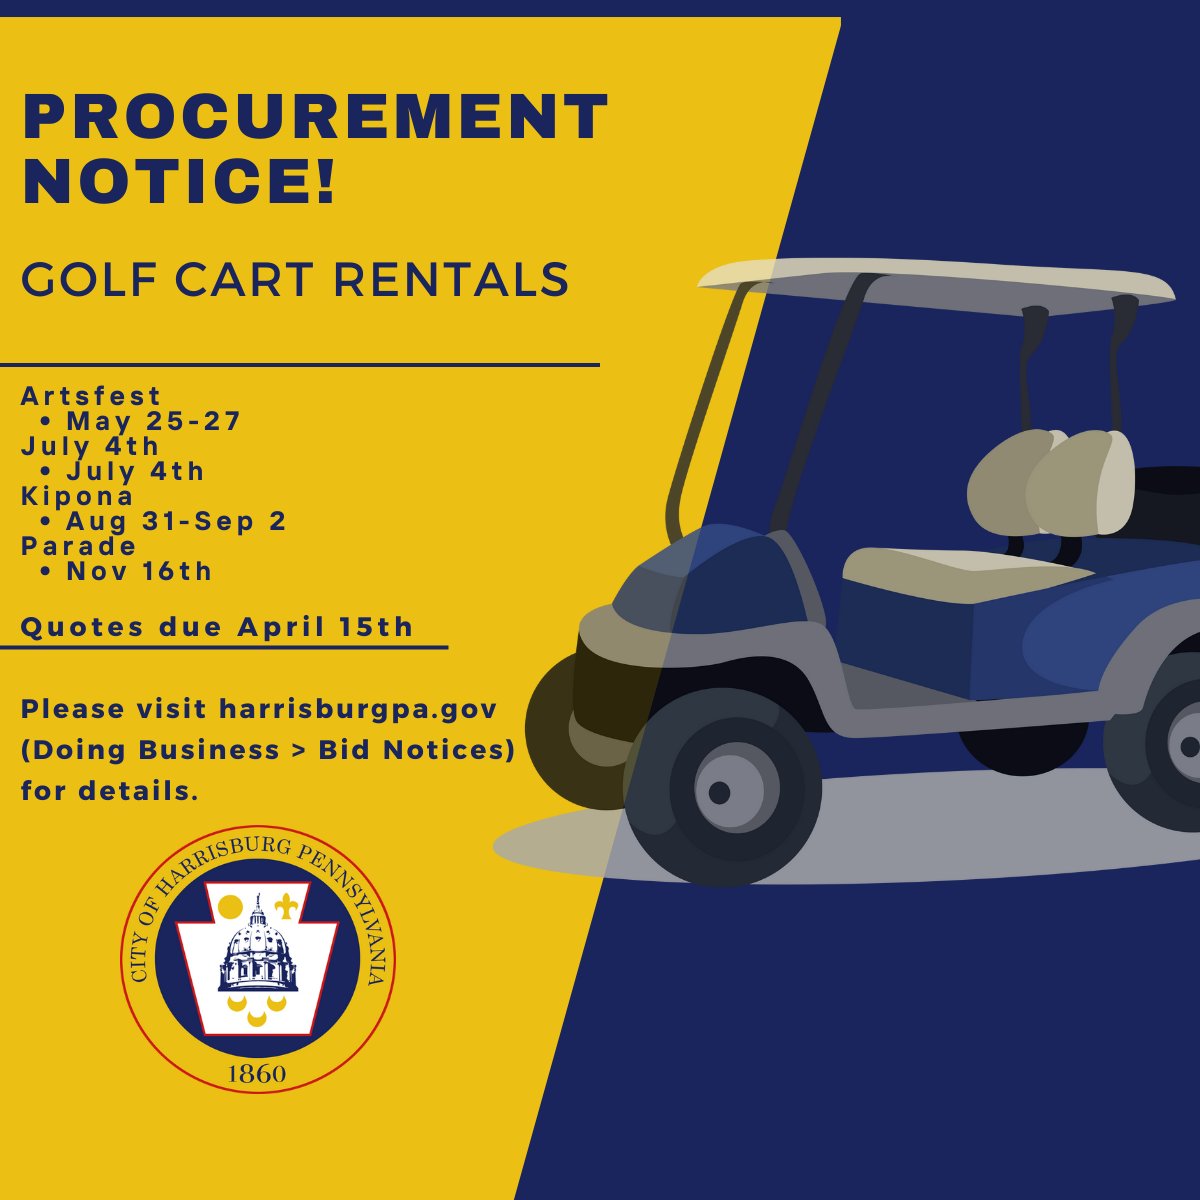 The City is currently seeking Golf Cart Rentals quotes. More details can be found at visit harrisburgpa.gov/financial-mana…